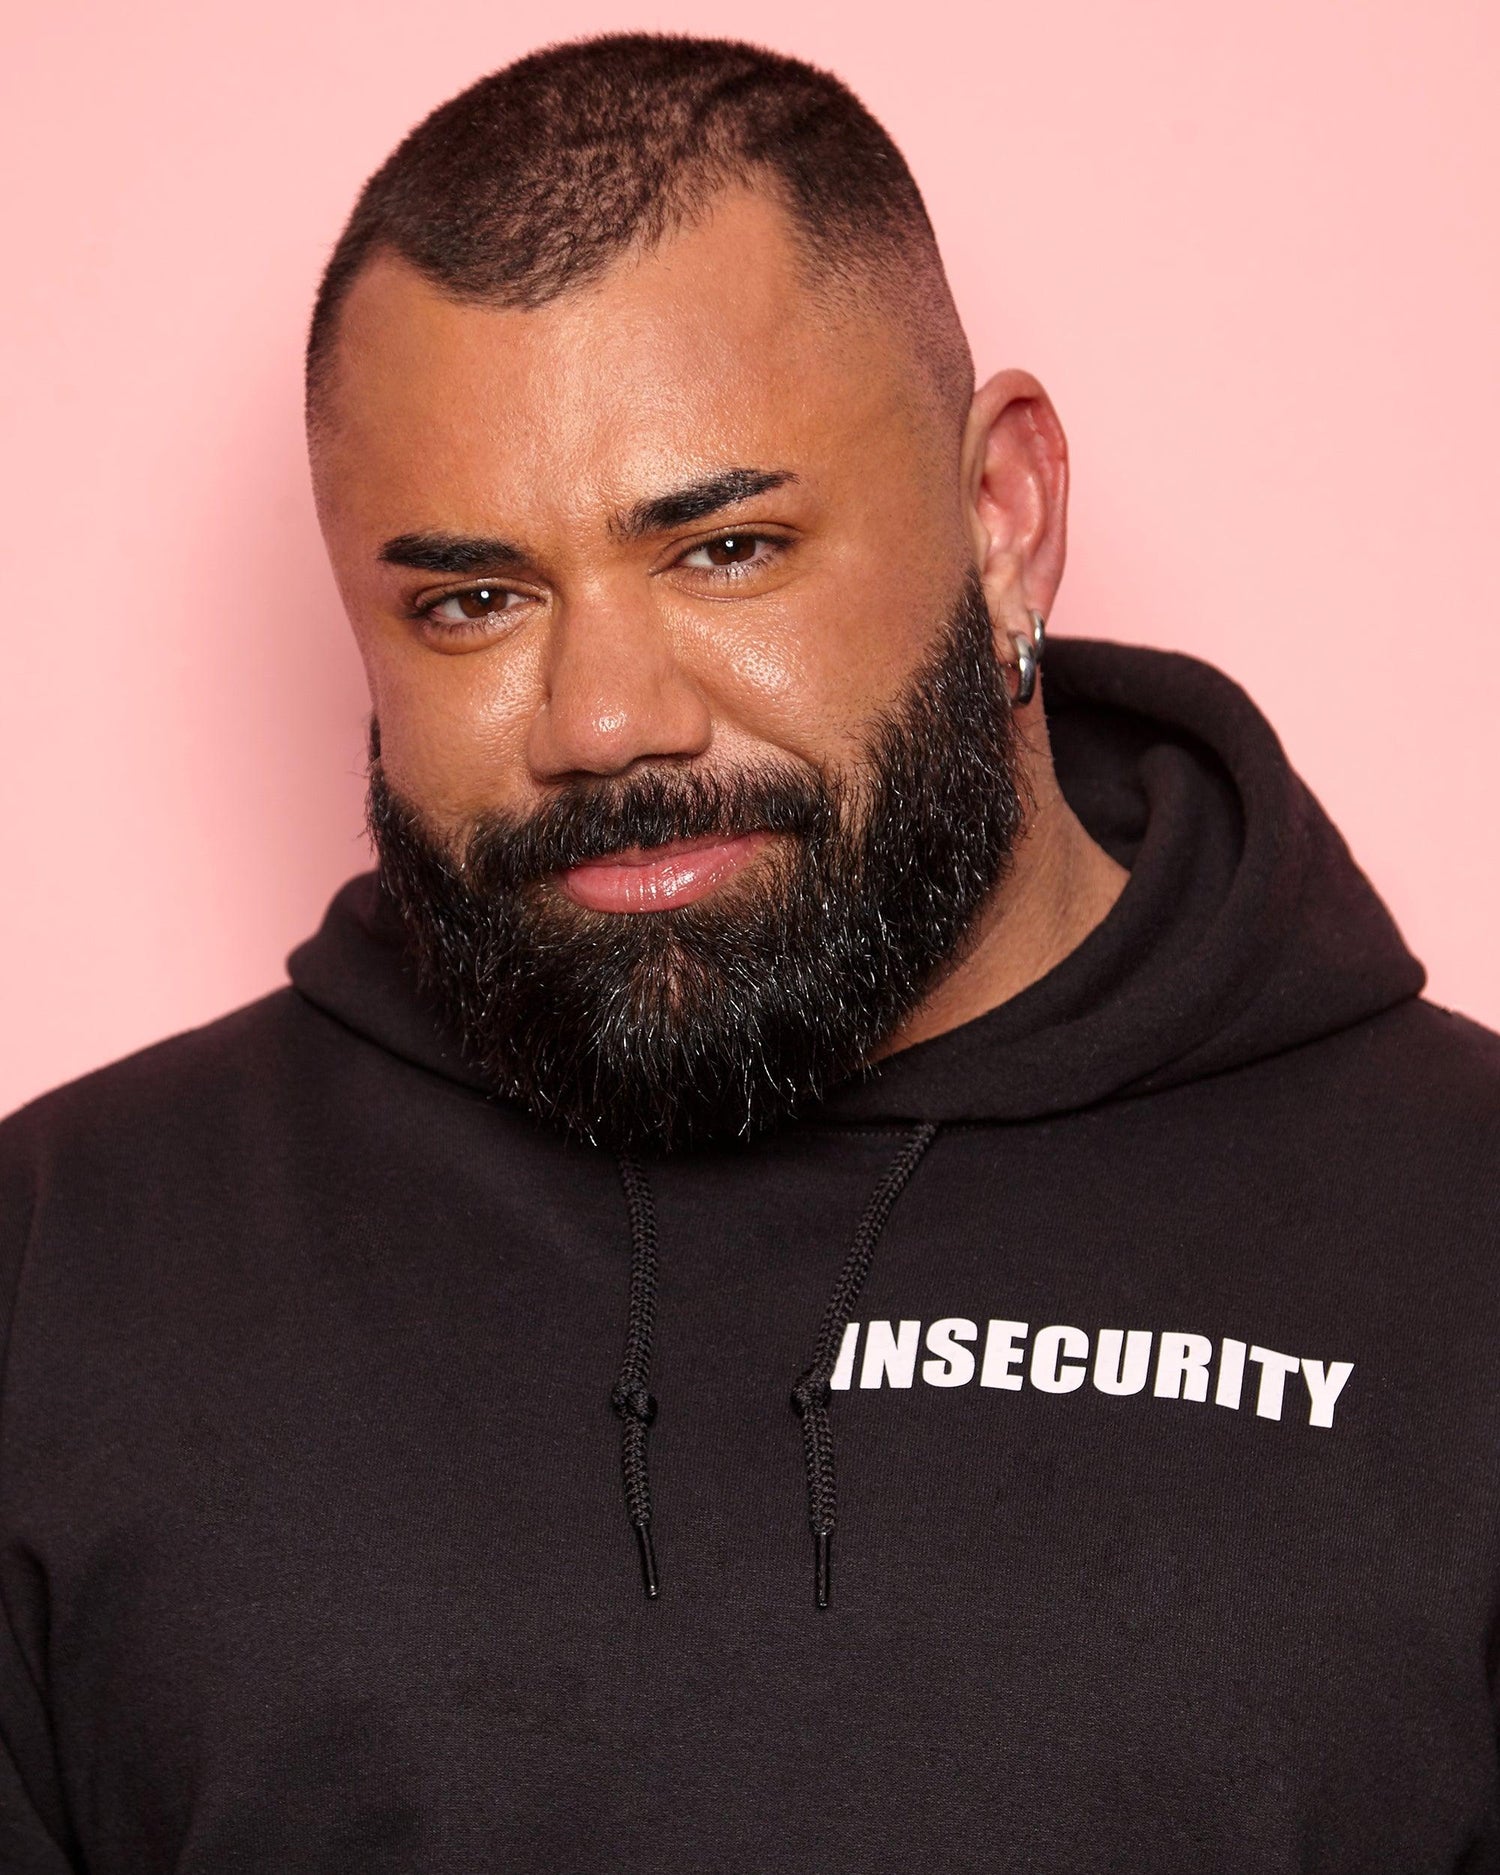 INSECURITY, white on black - pullover hoodie. - HOMOLONDON